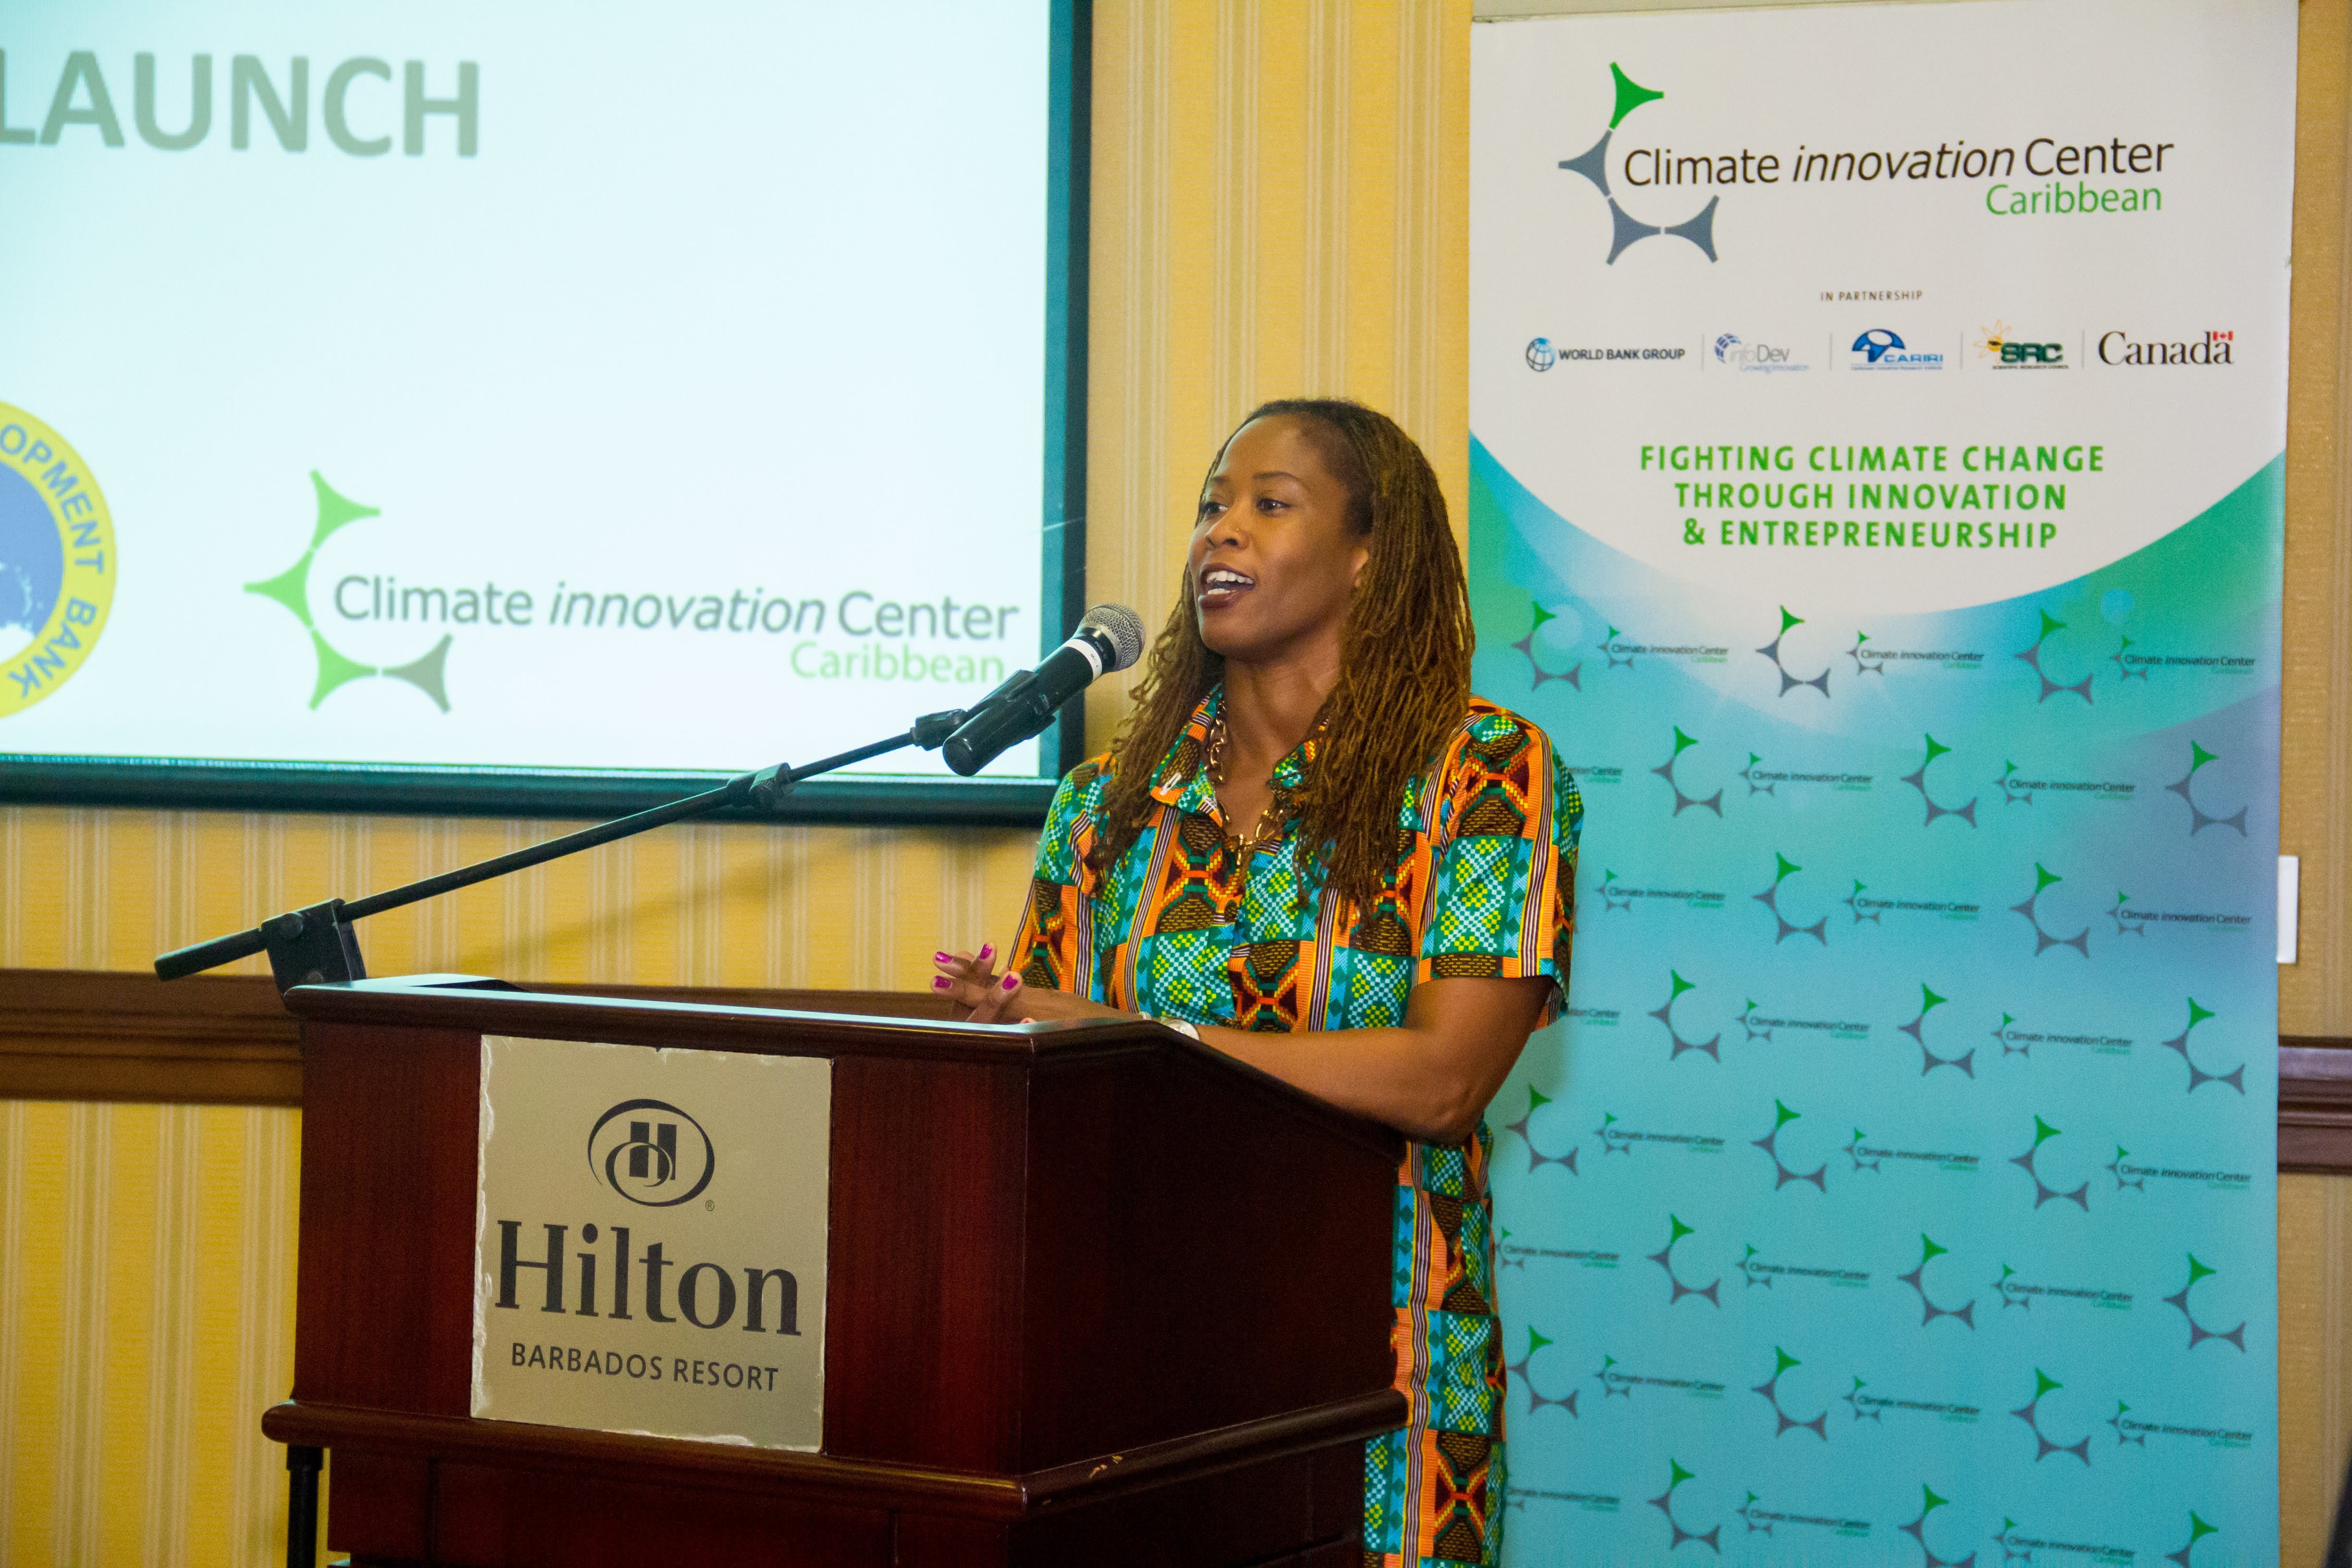 Lisa Harding, Coordinator, Micro, Small and Medium-Sized Enterprise, Technical Cooperation Division, CDB, believes supporting green tech entrepreneurs in the Region is critical to building climate resilience.